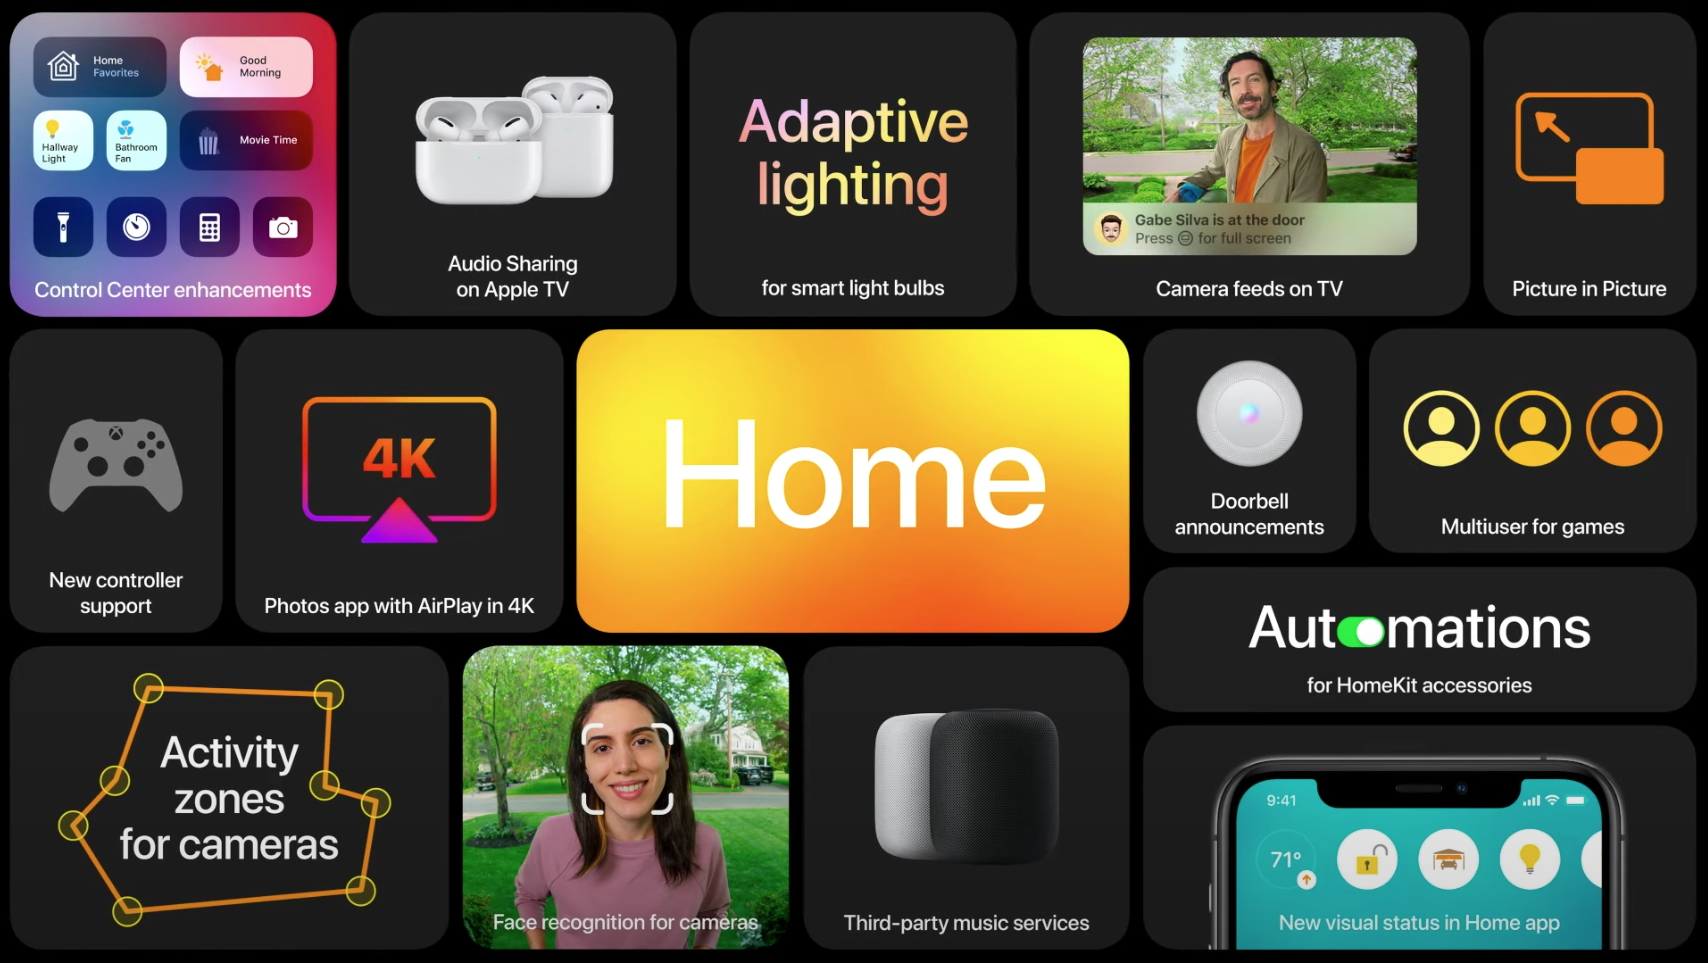 Overview of the new functionalities in the Home category